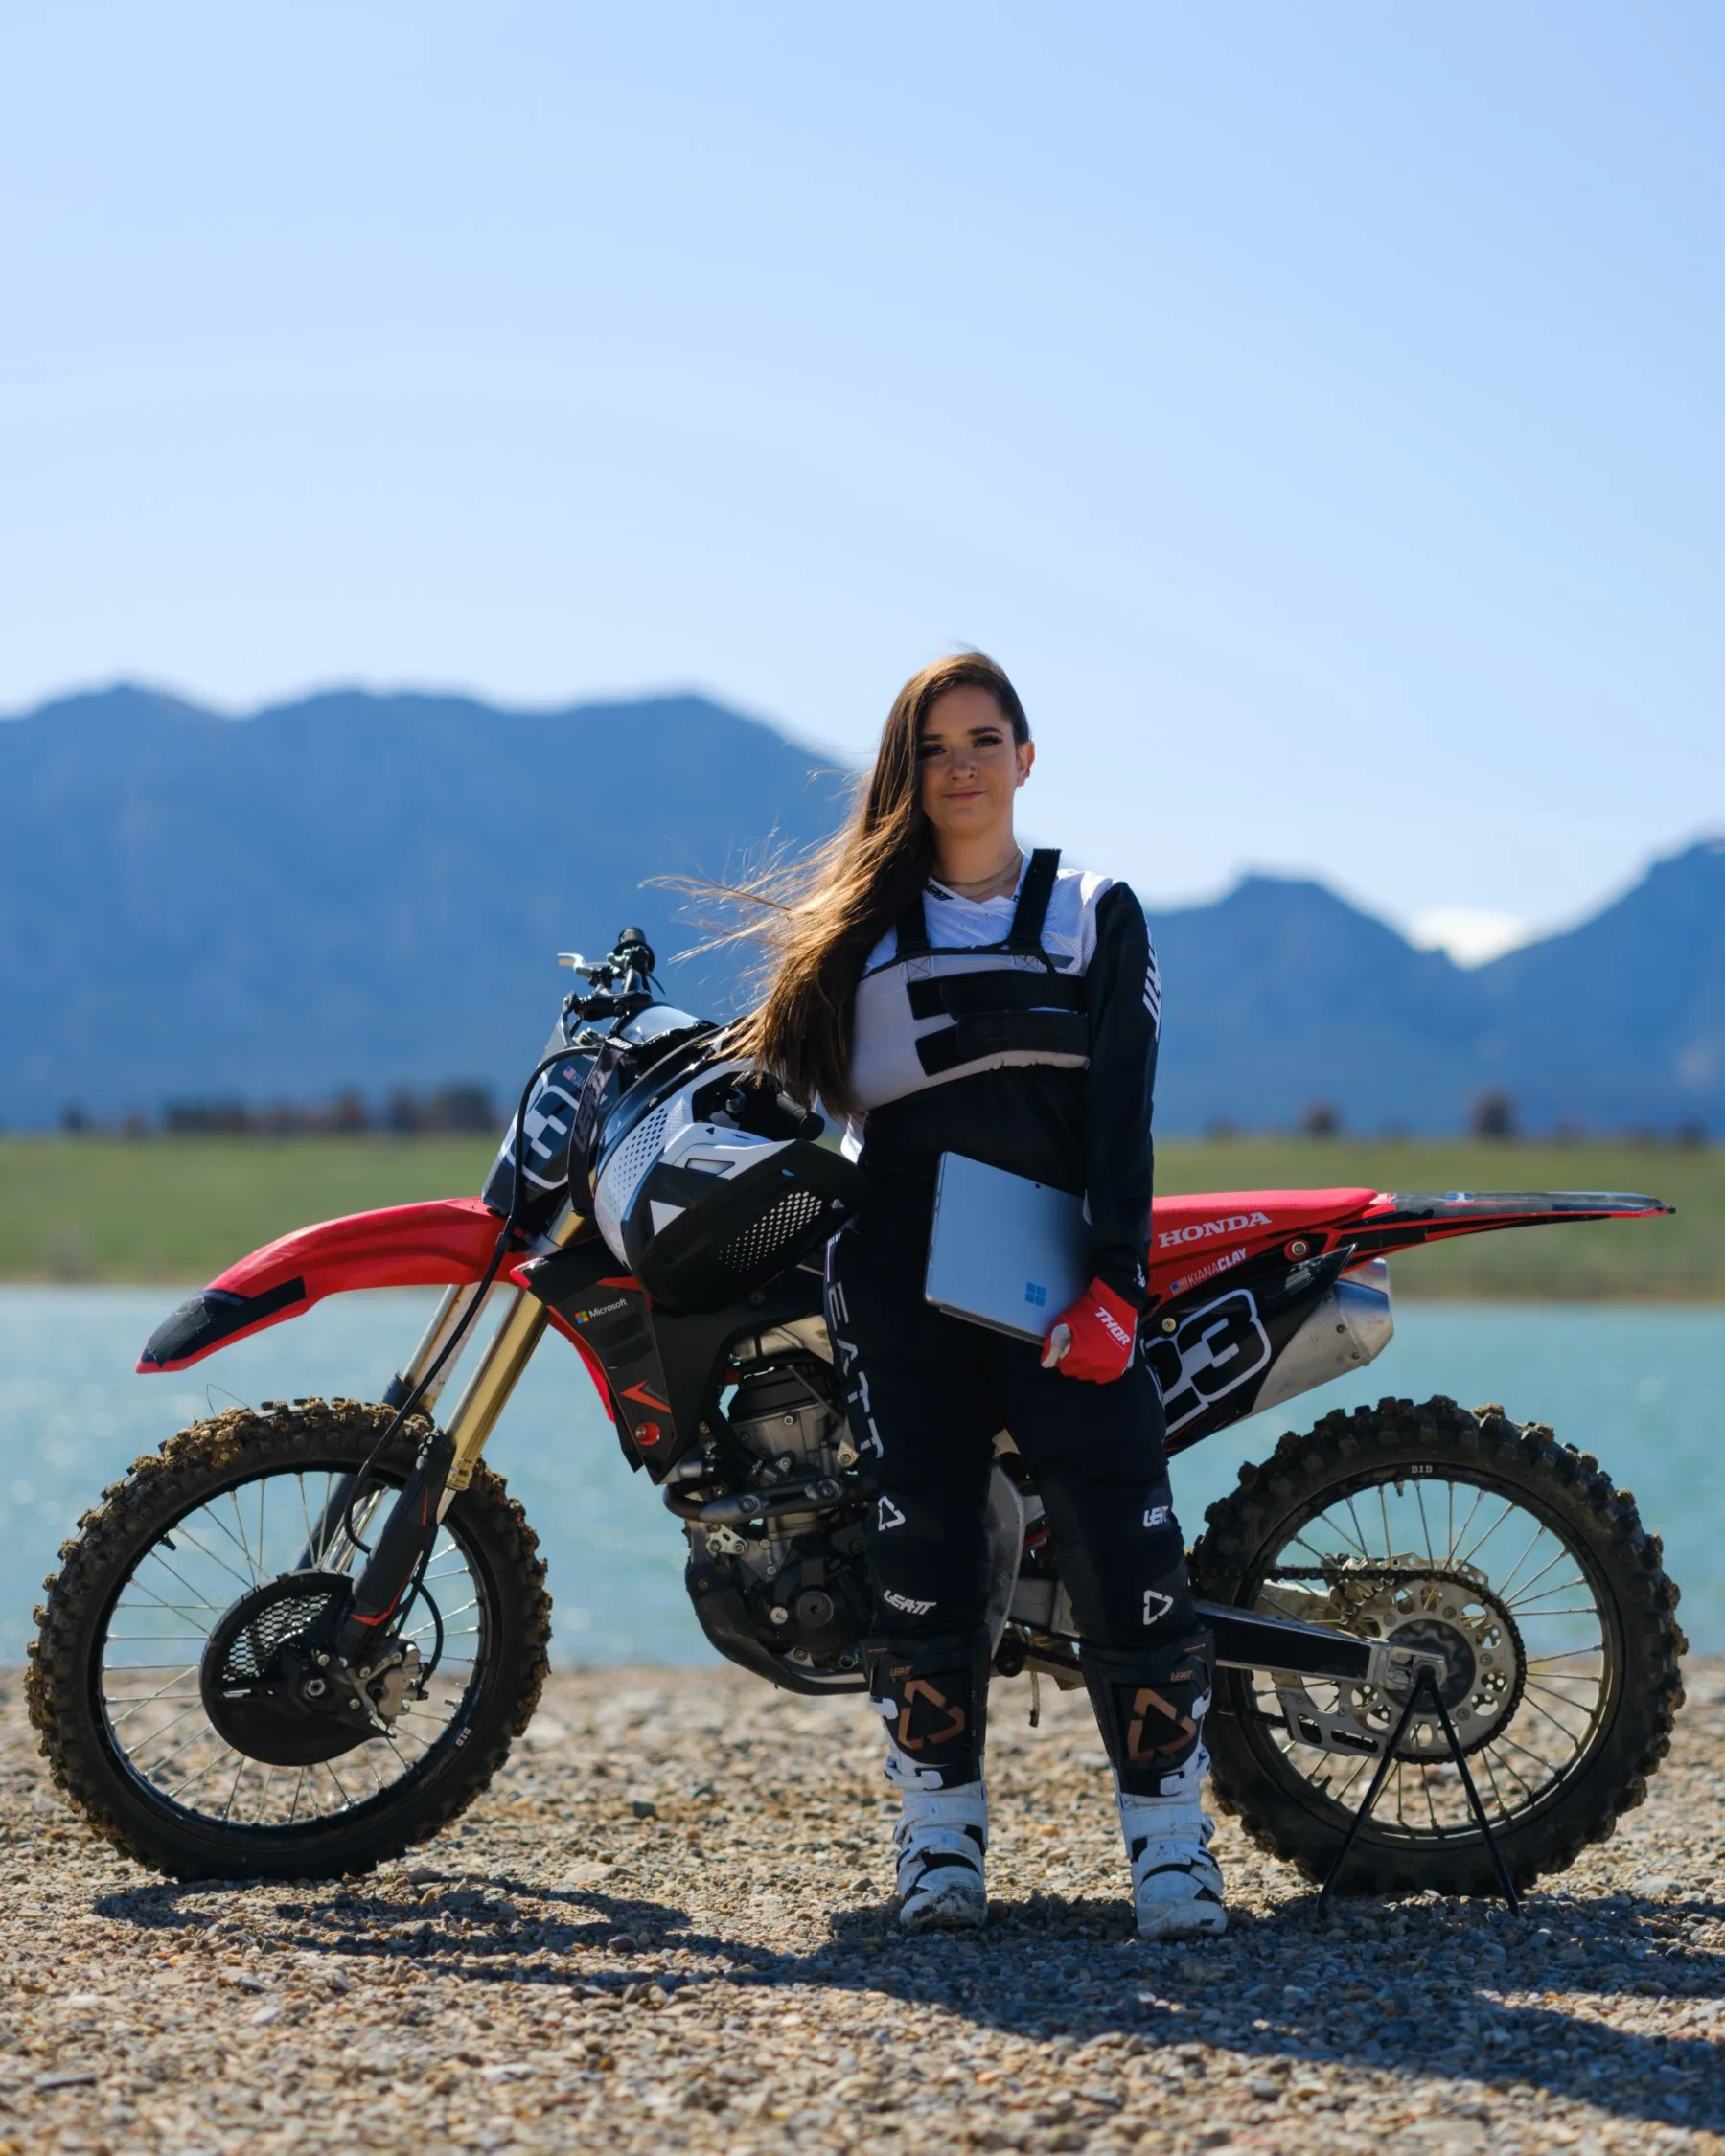 Kiana Clay stands in front of motocross bike with Microsoft Surface in hand